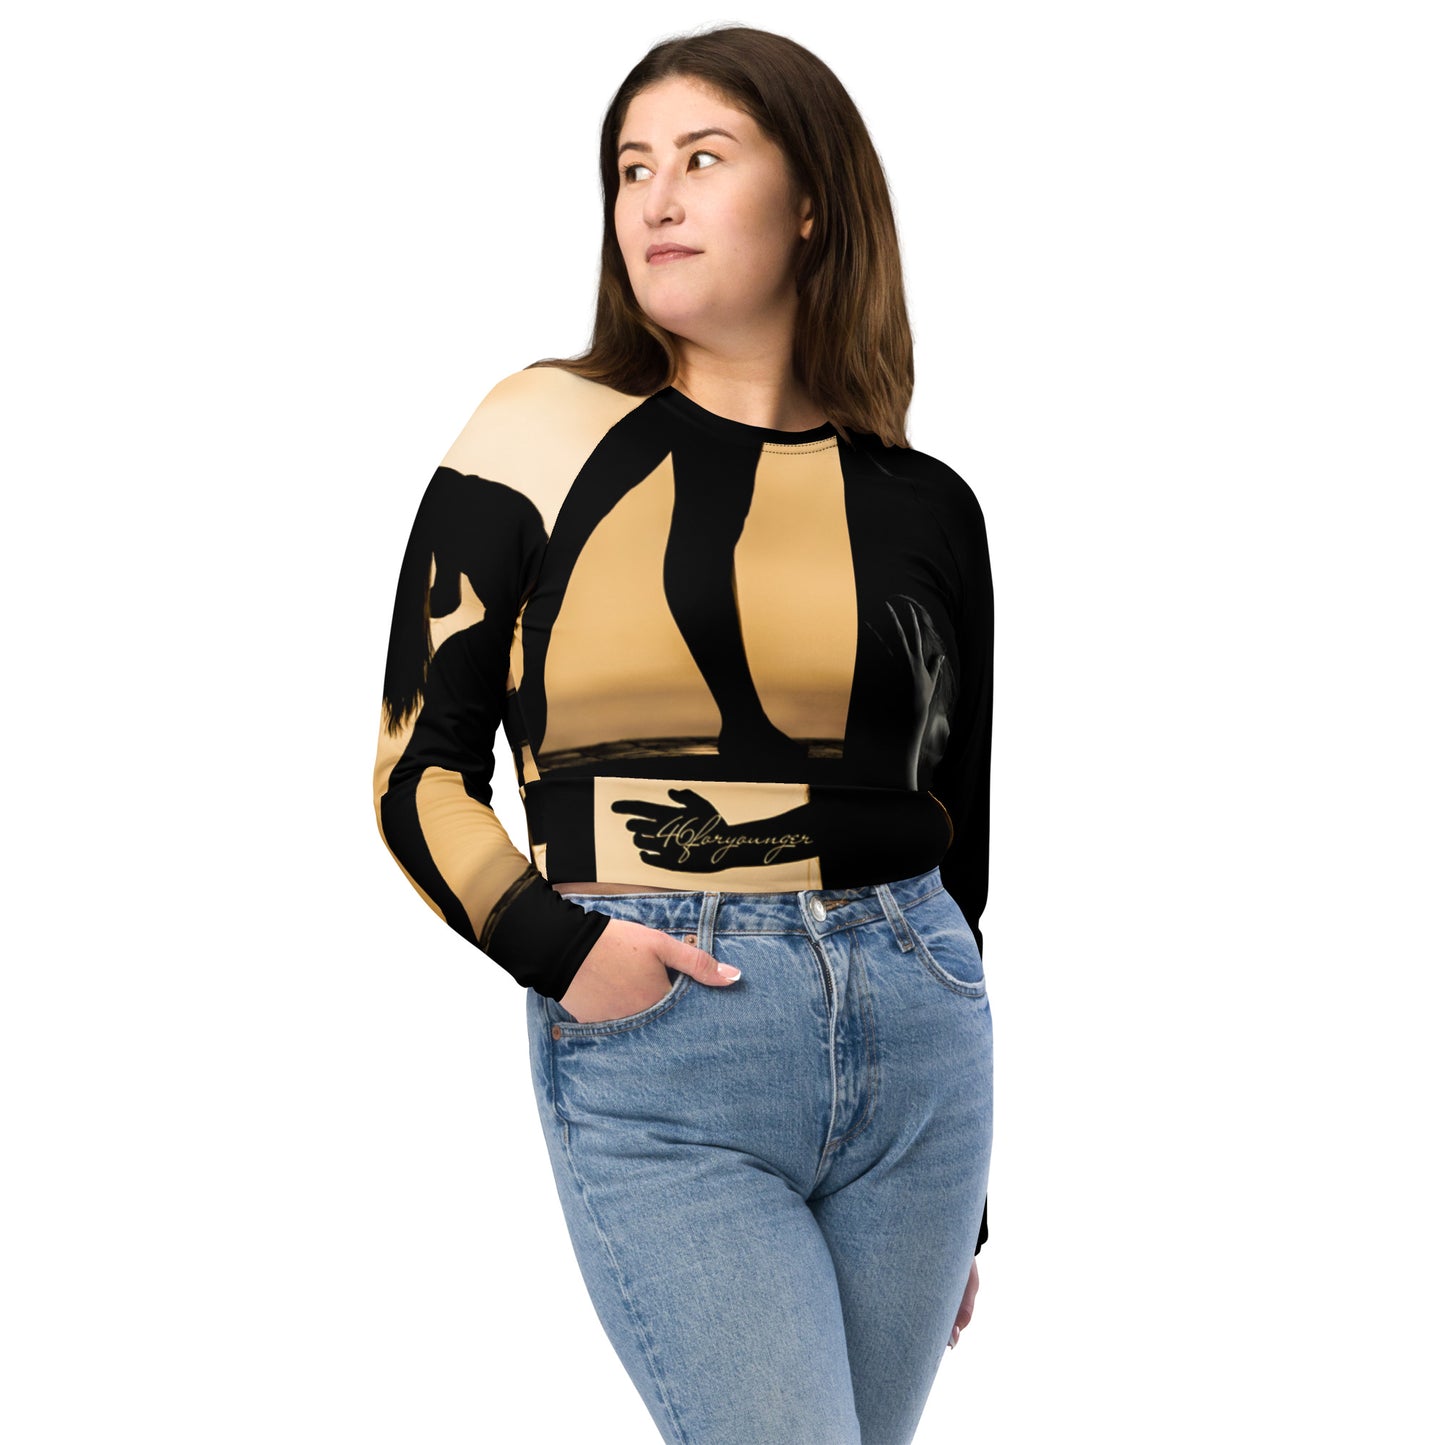 A-Ray of Emotions Long-Sleeve Crop Top - AH - Plus Size